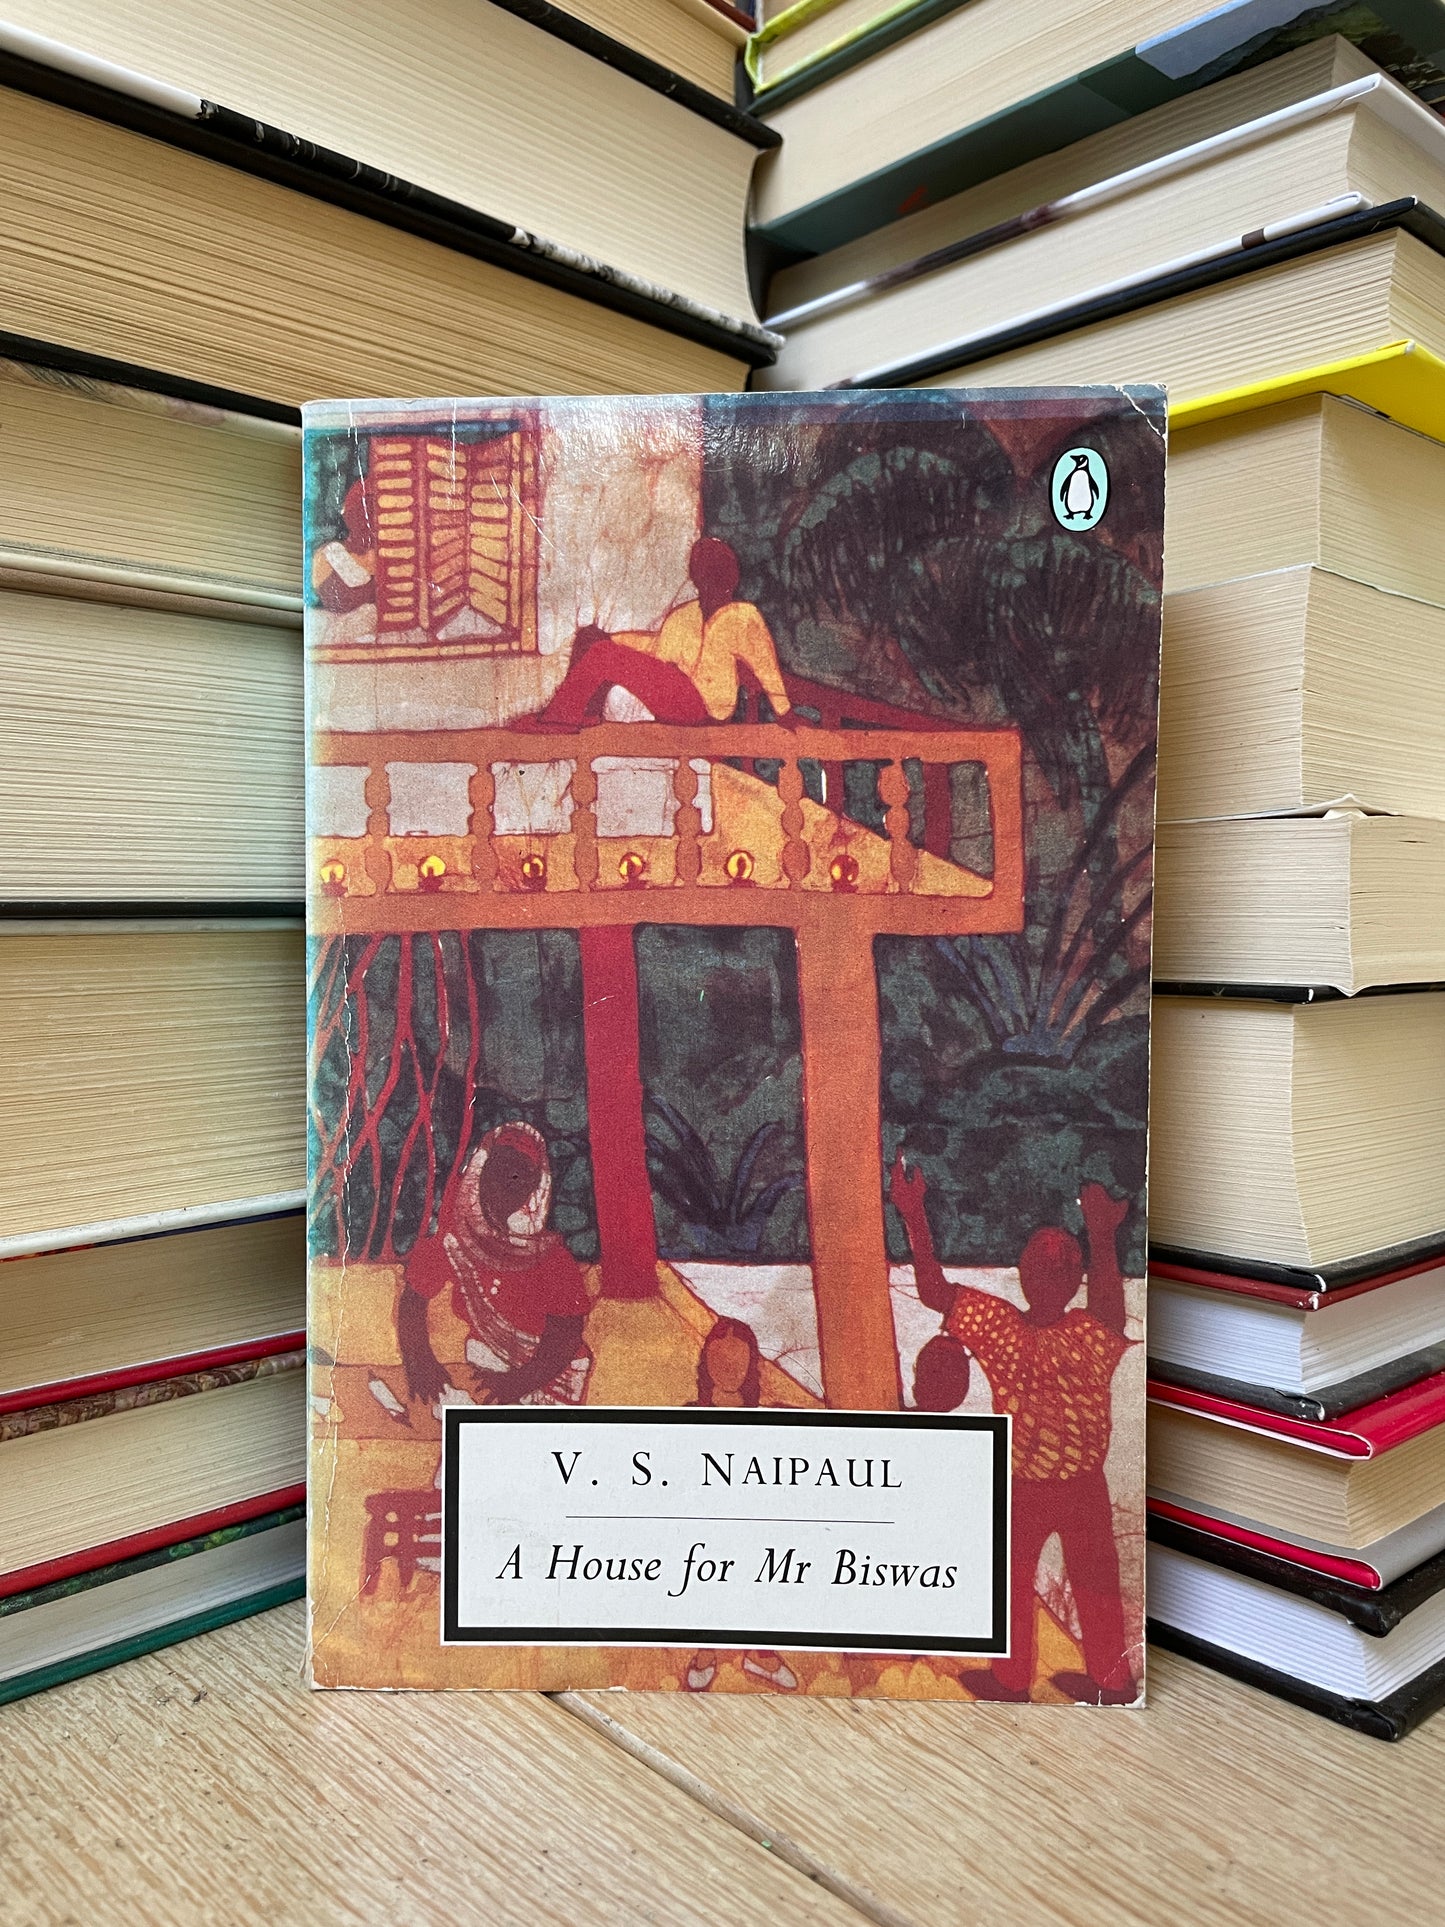 V. S. Naipaul - A House for Mr. Biswas